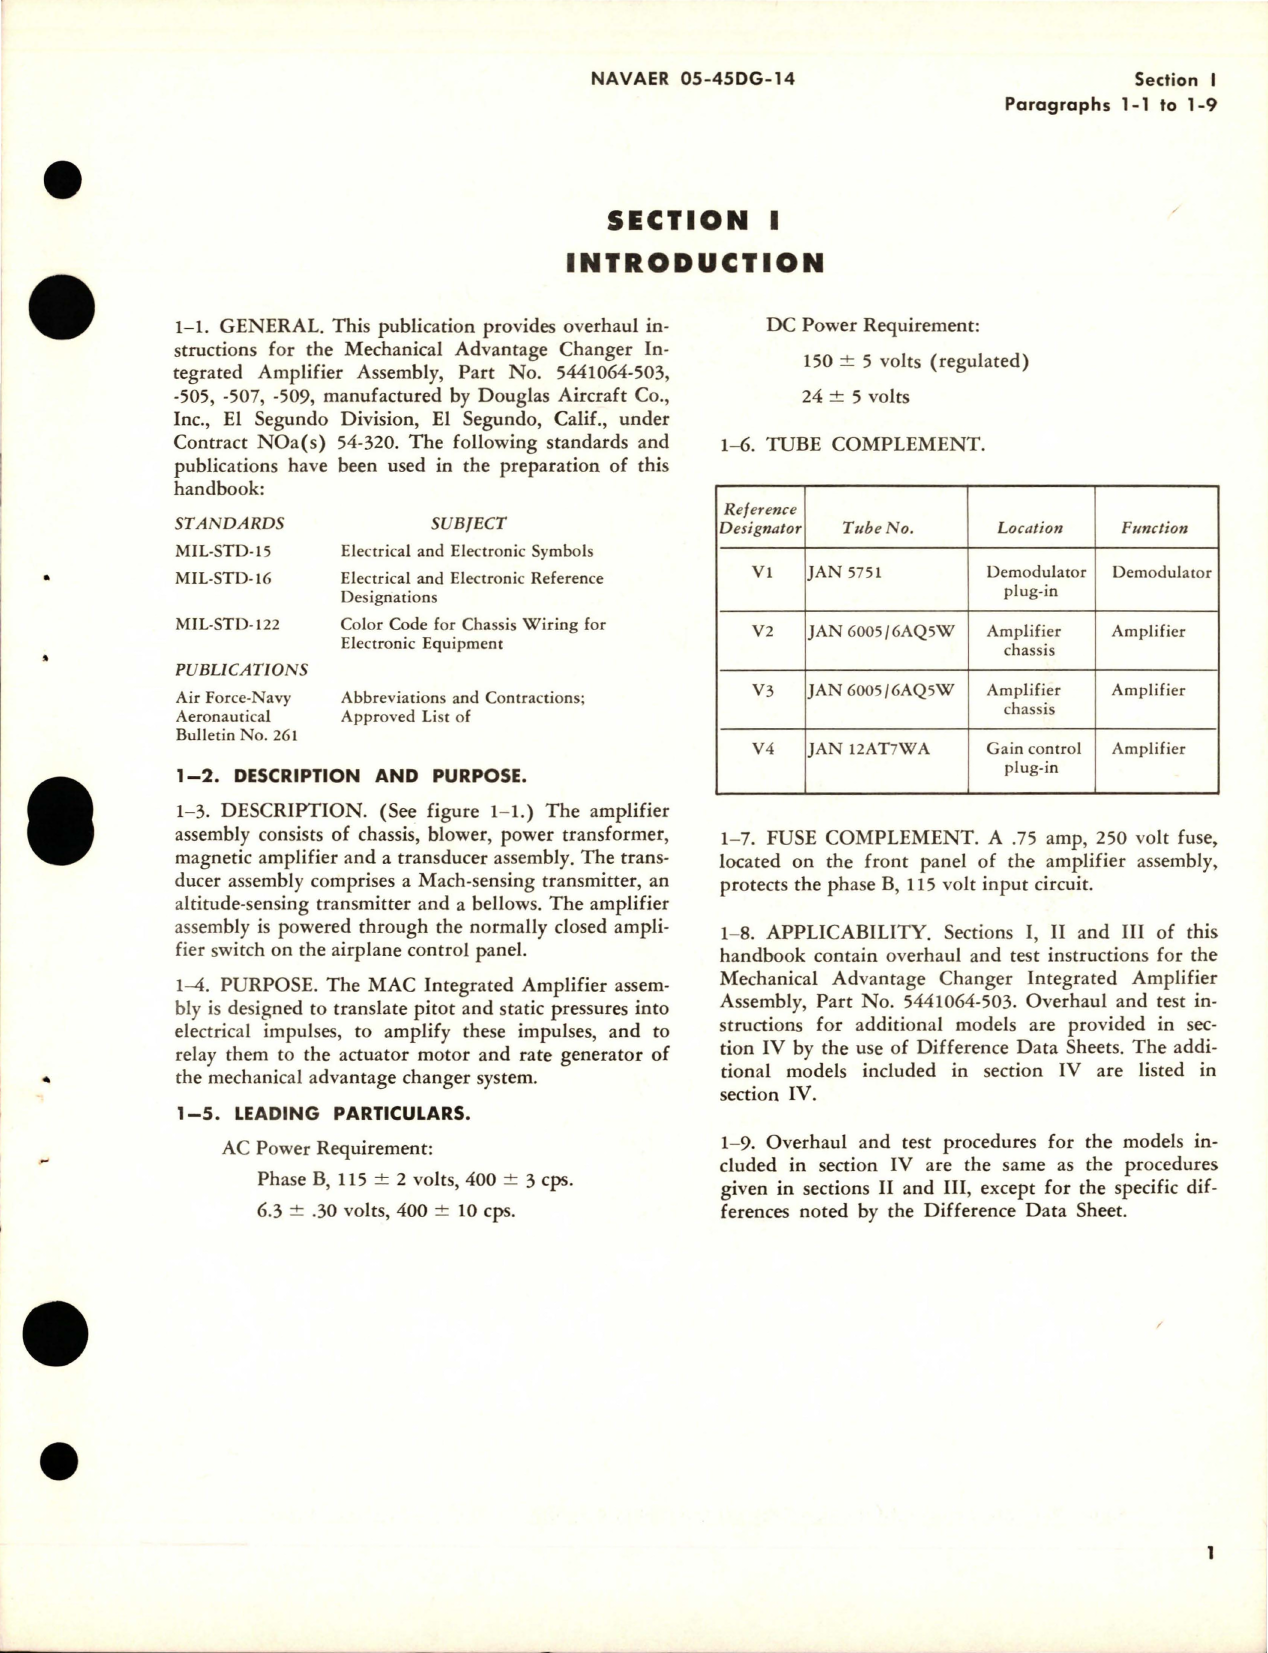 Sample page 5 from AirCorps Library document: Overhaul Instructions for Amplifier Assembly, Mechanical Advantage Changer Integrated